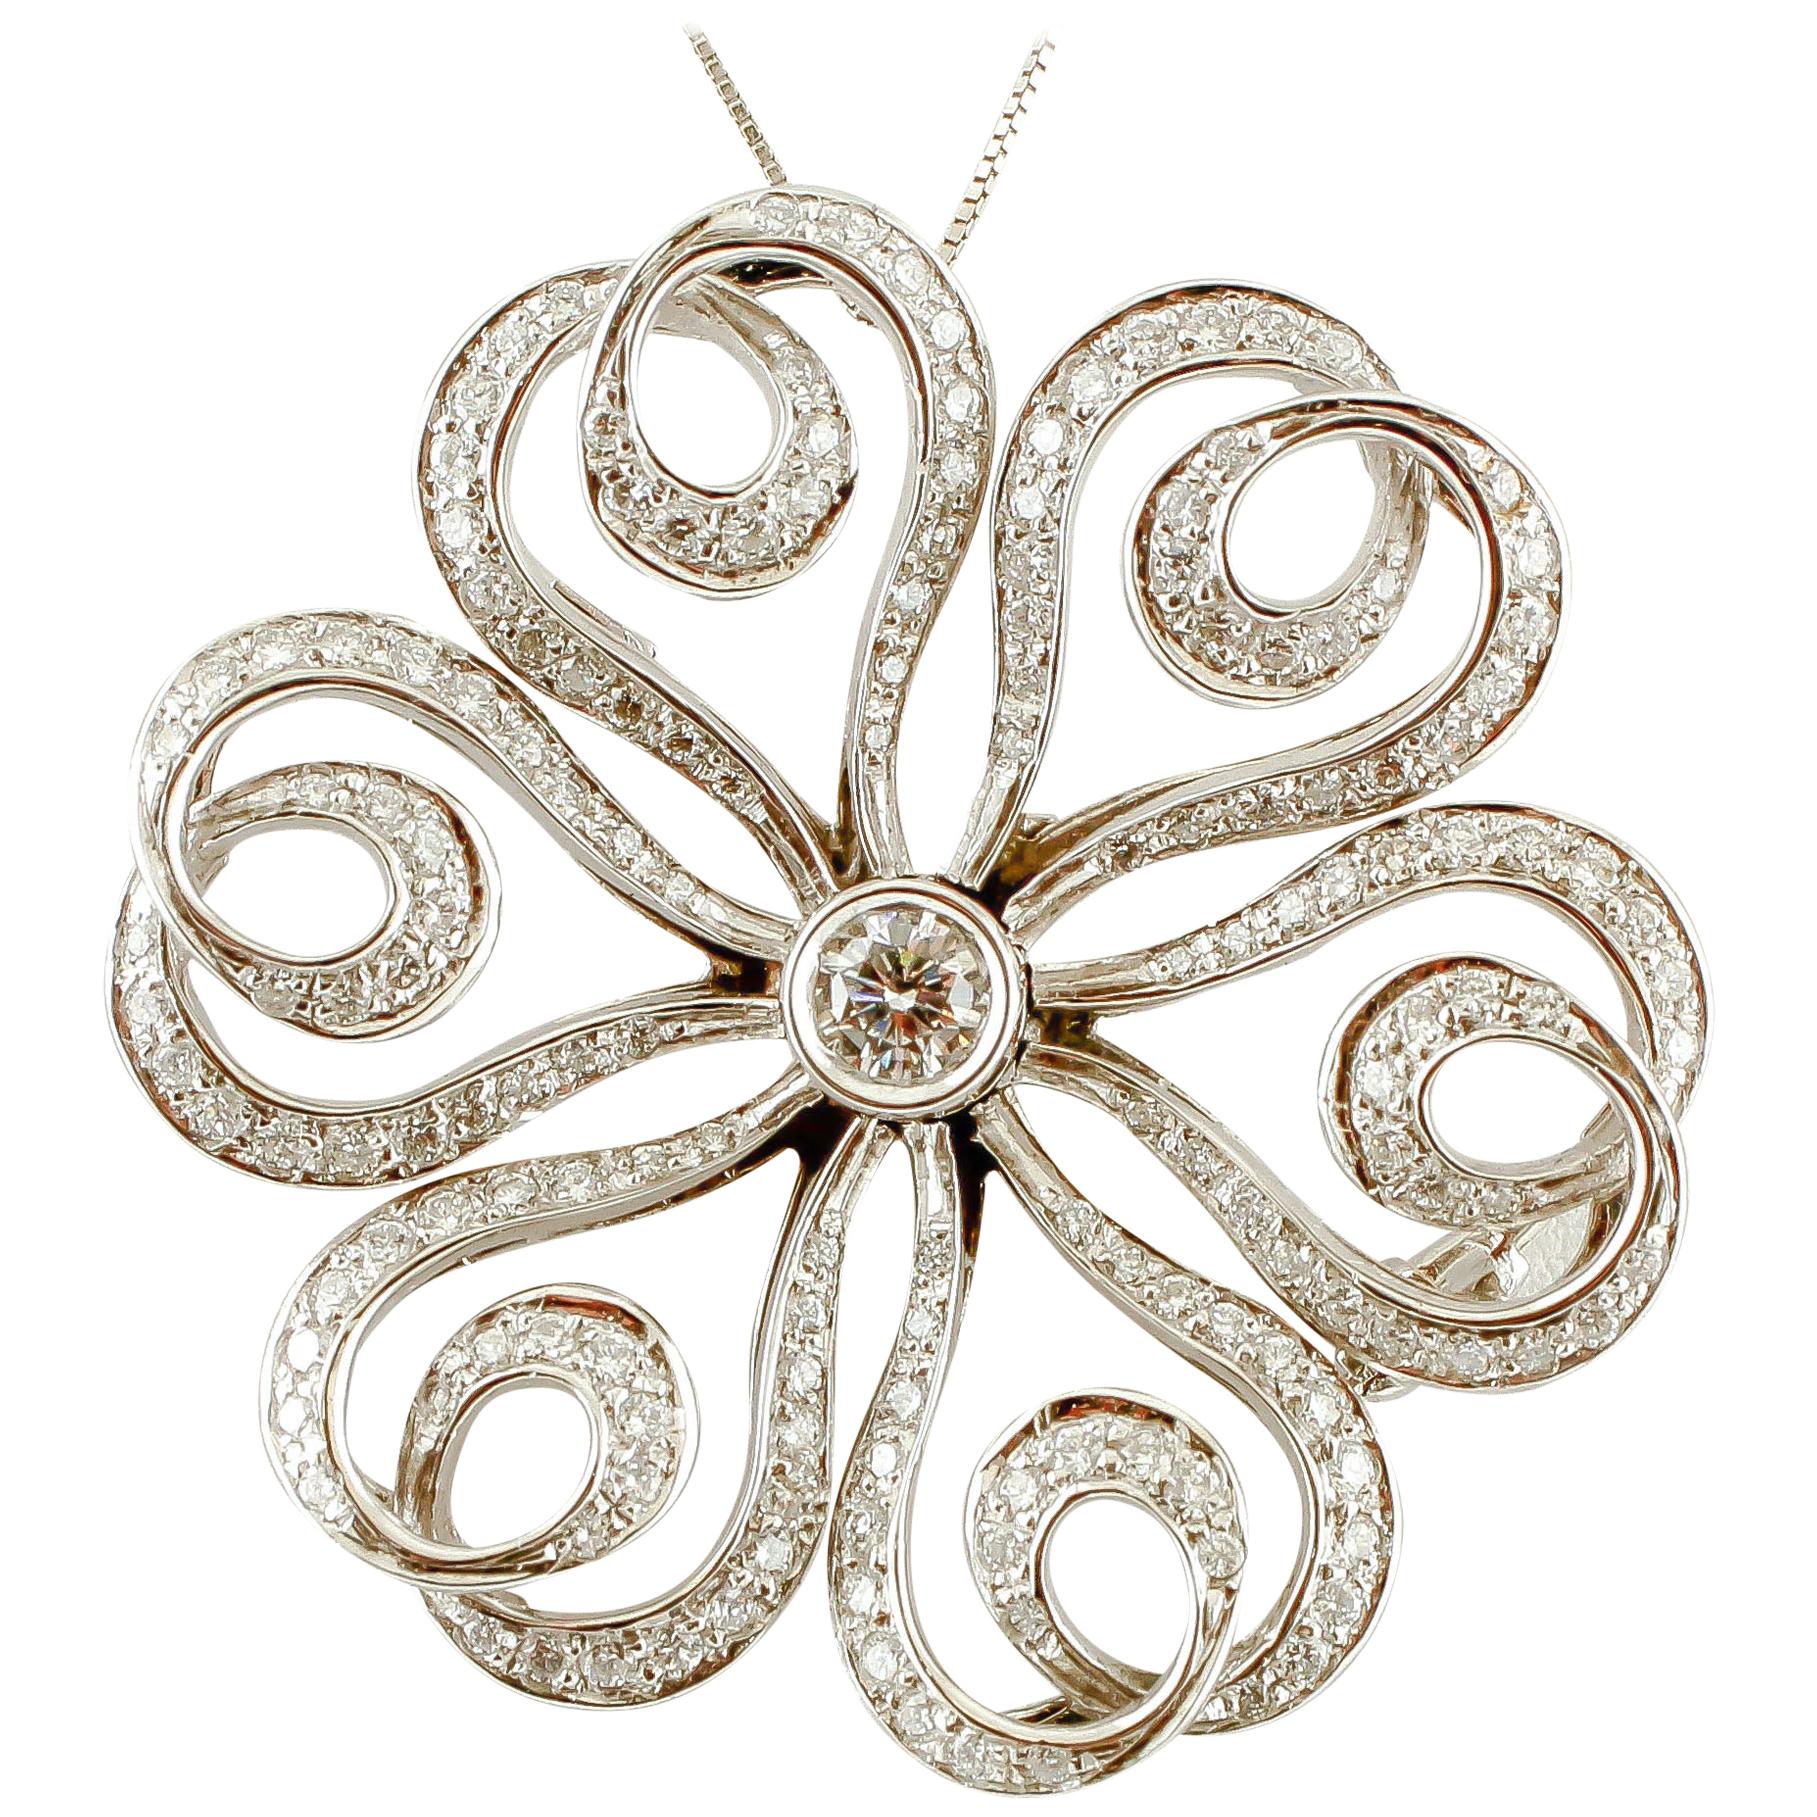 Diamonds and 18 Karat White Gold Flower Brooch 'Chain Not Included'